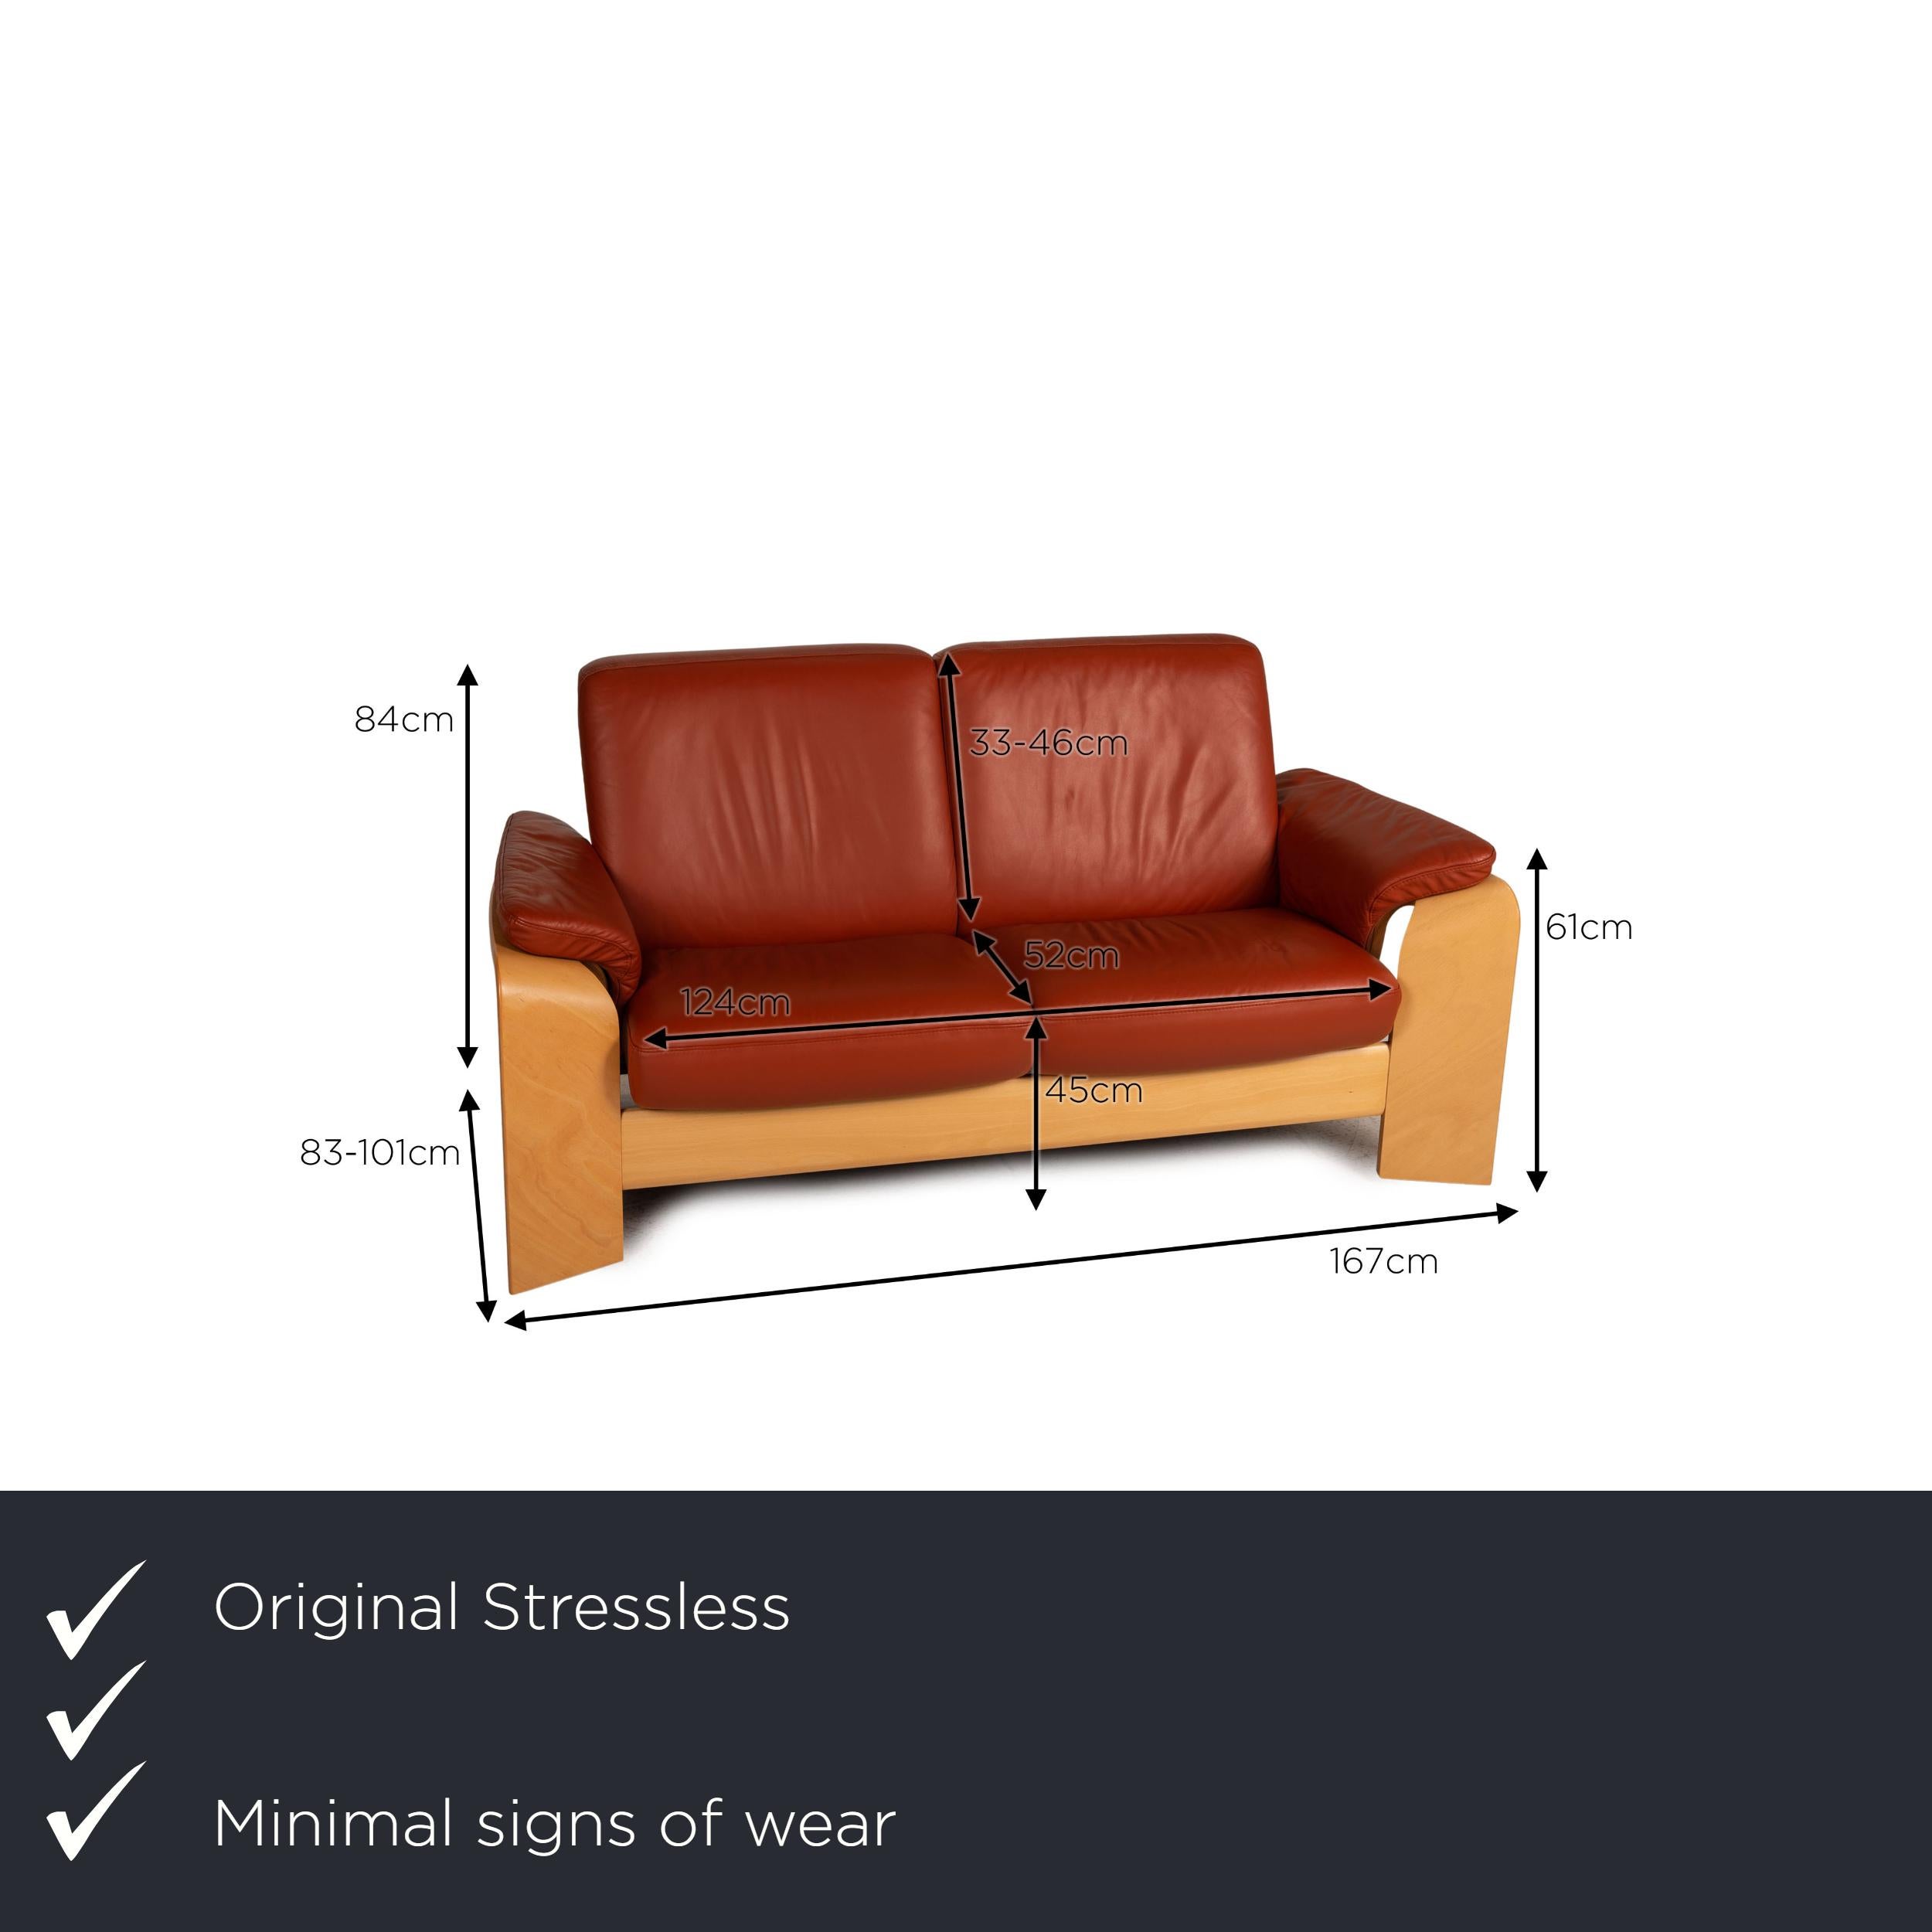 We present to you a Stressless Pegasus leather sofa red two seater couch.
 

 Product measurements in centimeters:
 

Depth: 83
Width: 167
Height: 84
Seat height: 45
Rest height: 61
Seat depth: 52
Seat width: 124
Back height: 33.
 